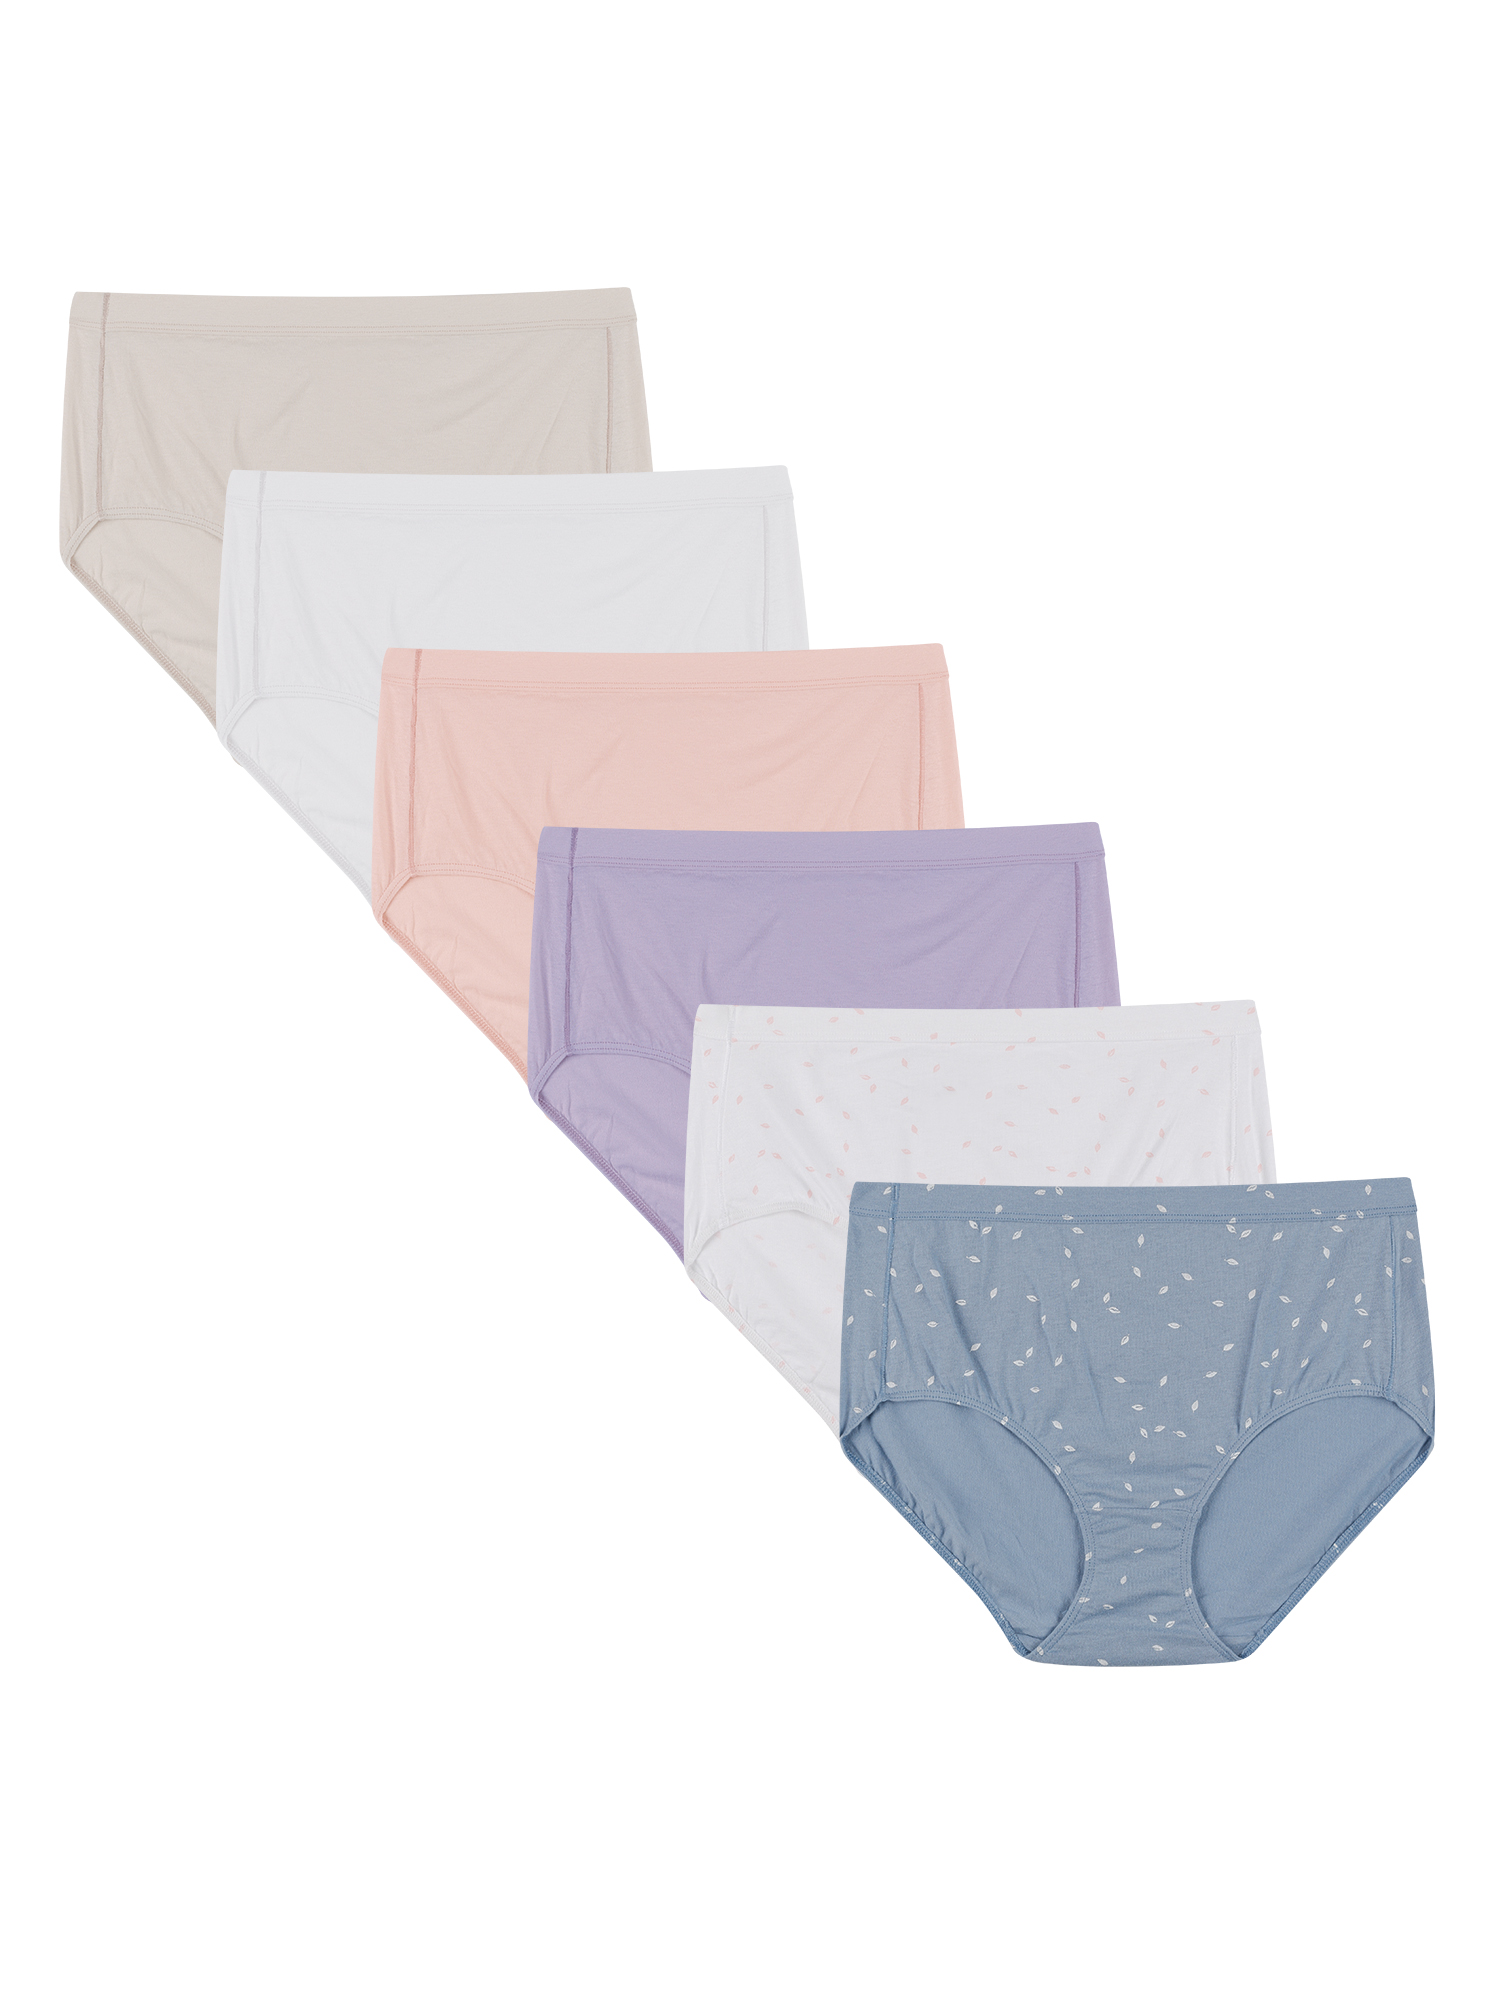 Hanes Pure Comfort Women’s Briefs Underwear, 100% Organic Cotton, Assorted Colors, 6-Pack - image 3 of 8